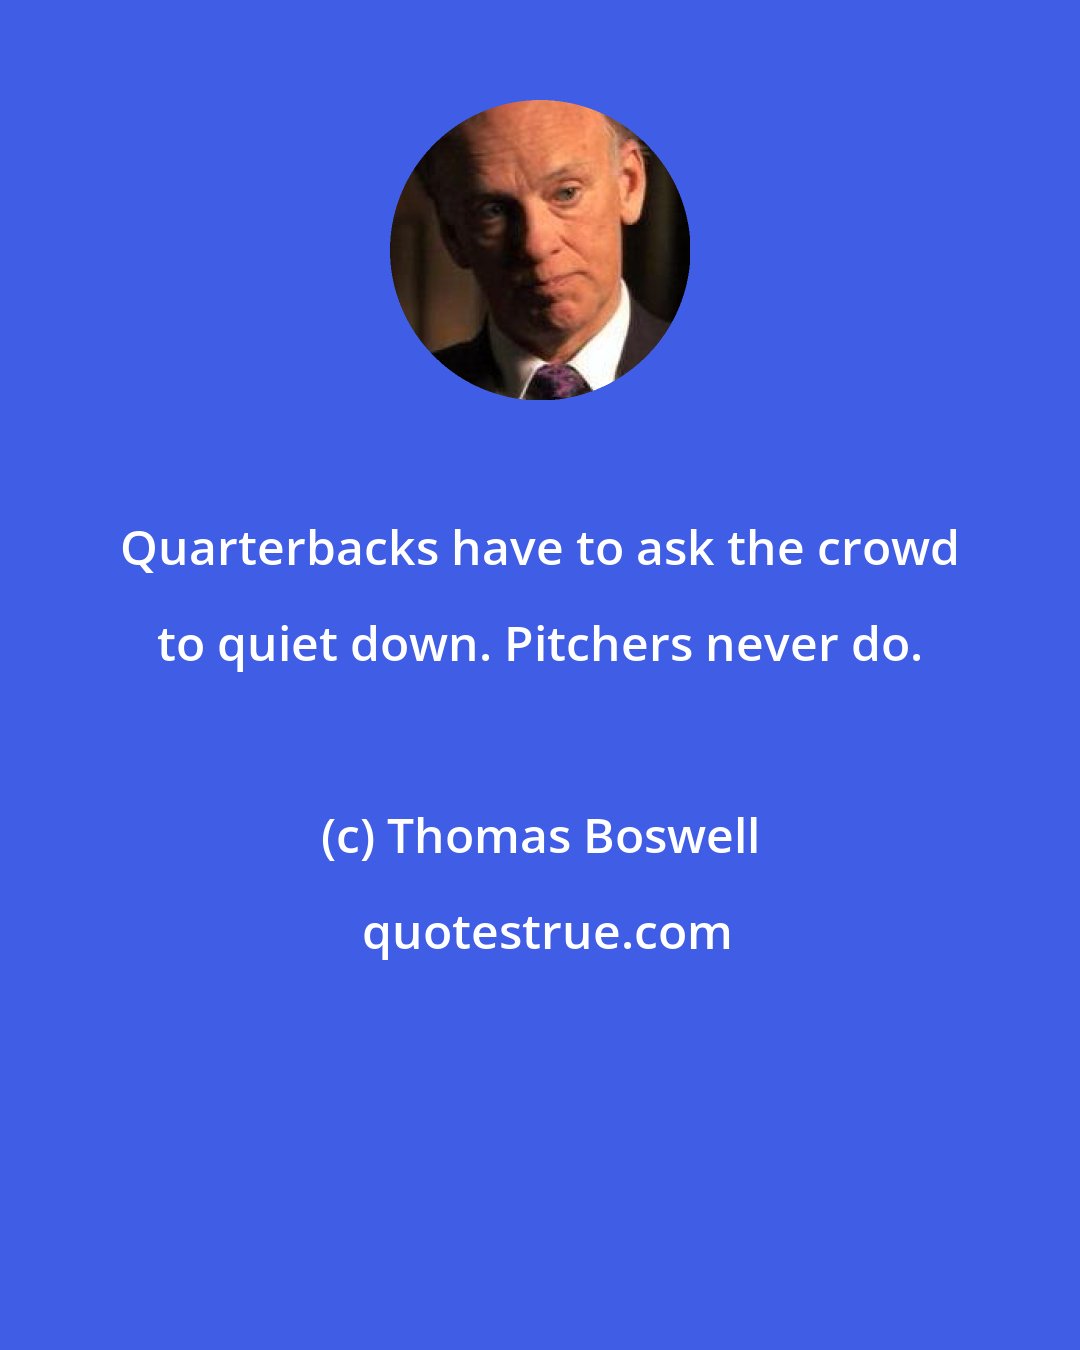 Thomas Boswell: Quarterbacks have to ask the crowd to quiet down. Pitchers never do.